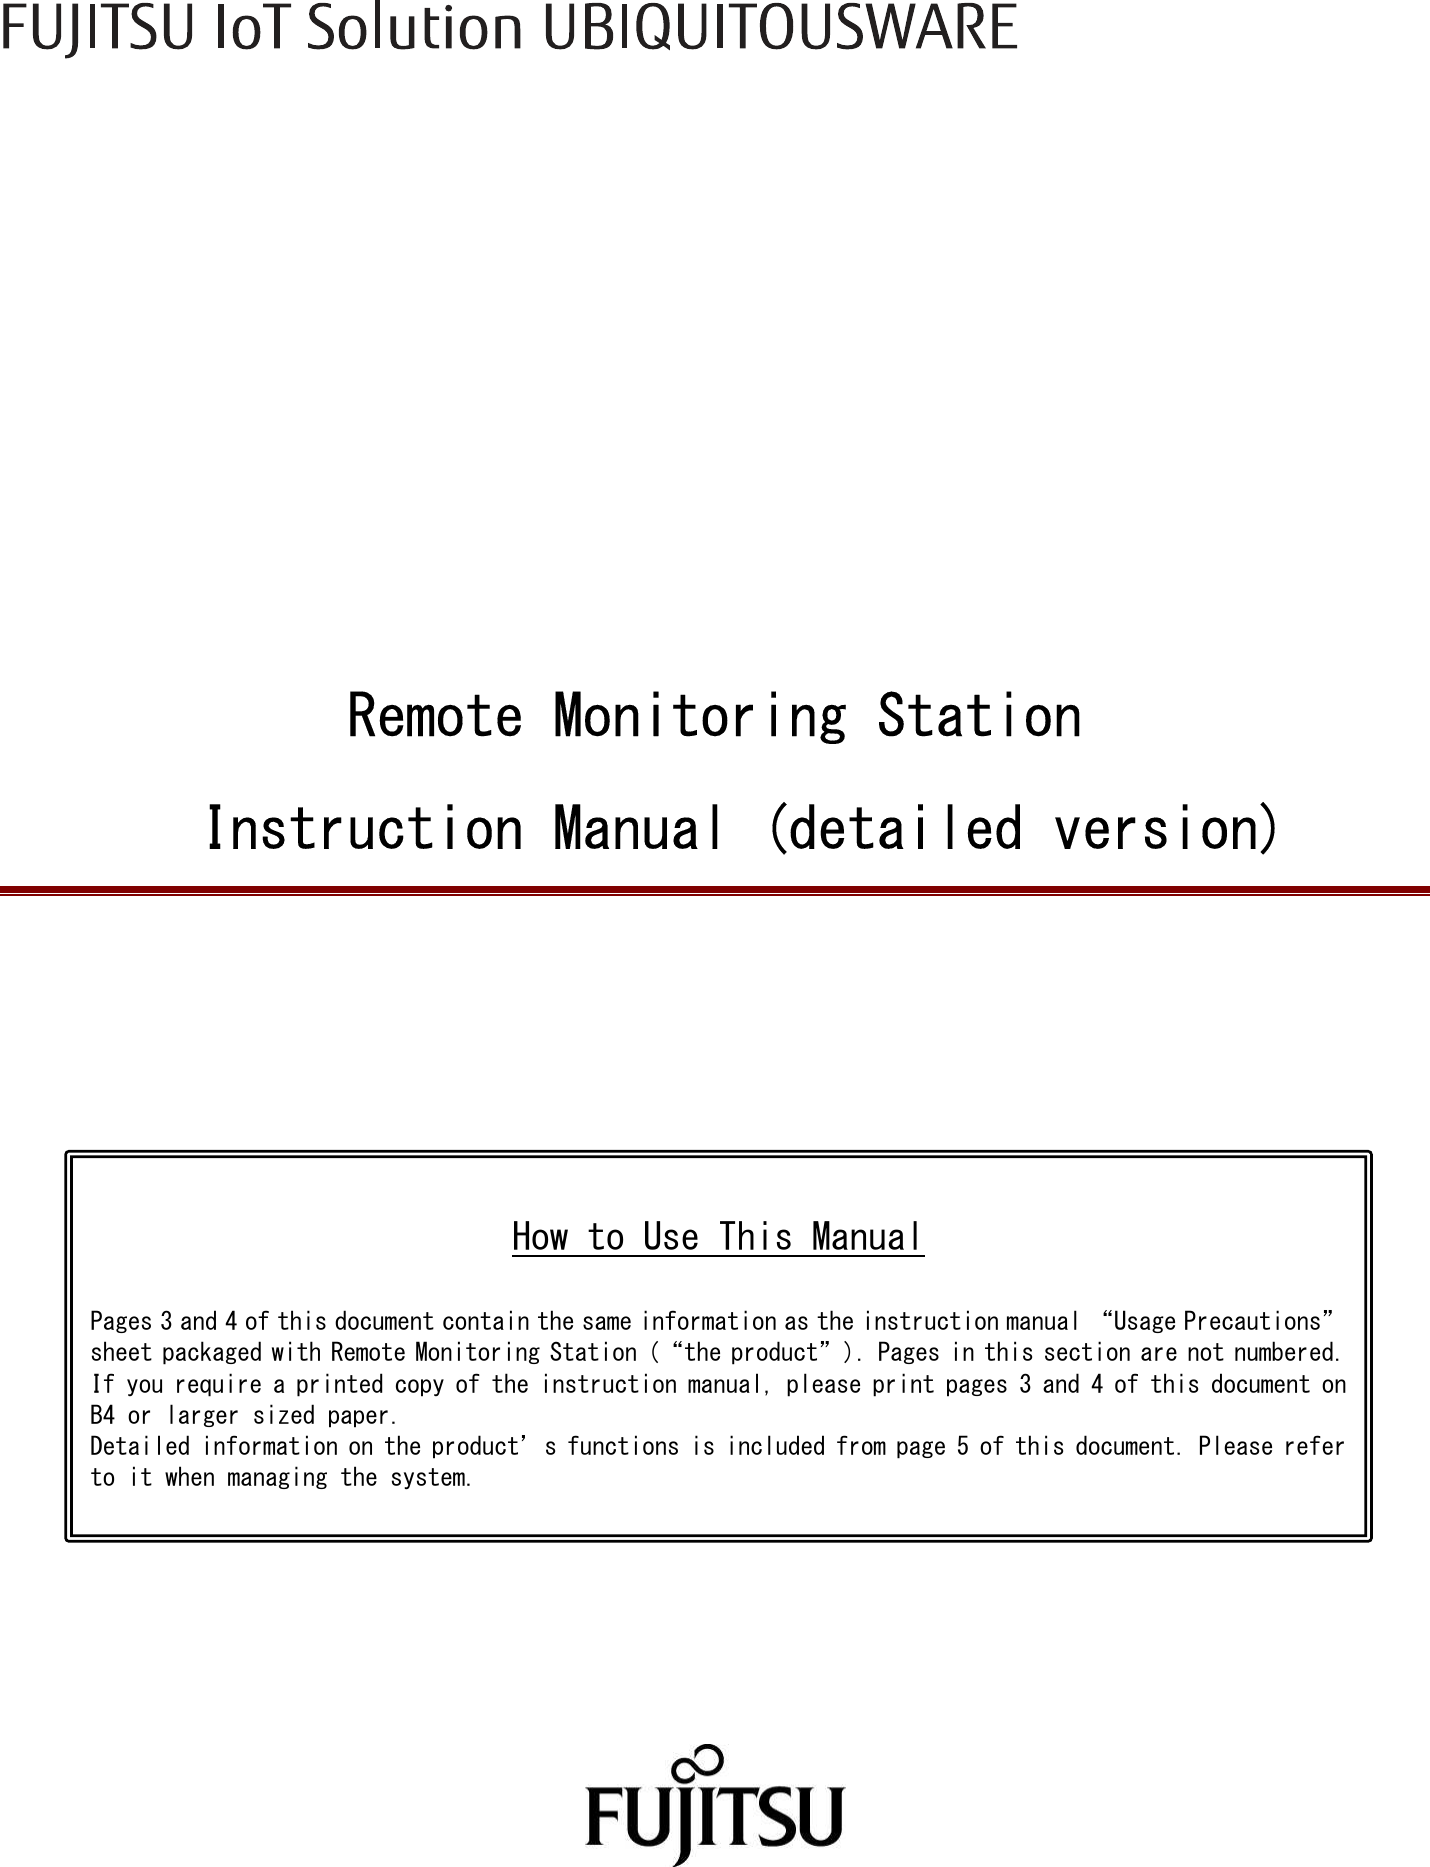                       Remote Monitoring Station   Instruction Manual (detailed version)                                    How to Use This Manual  Pages 3 and 4 of this document contain the same information as the instruction manual “Usage Precautions” sheet packaged with Remote Monitoring Station (“the product”). Pages in this section are not numbered. If you require a printed copy of the instruction manual, please print pages 3 and 4 of this document on B4 or larger sized paper. Detailed information on the product’s functions is included from page 5 of this document. Please refer to it when managing the system. 